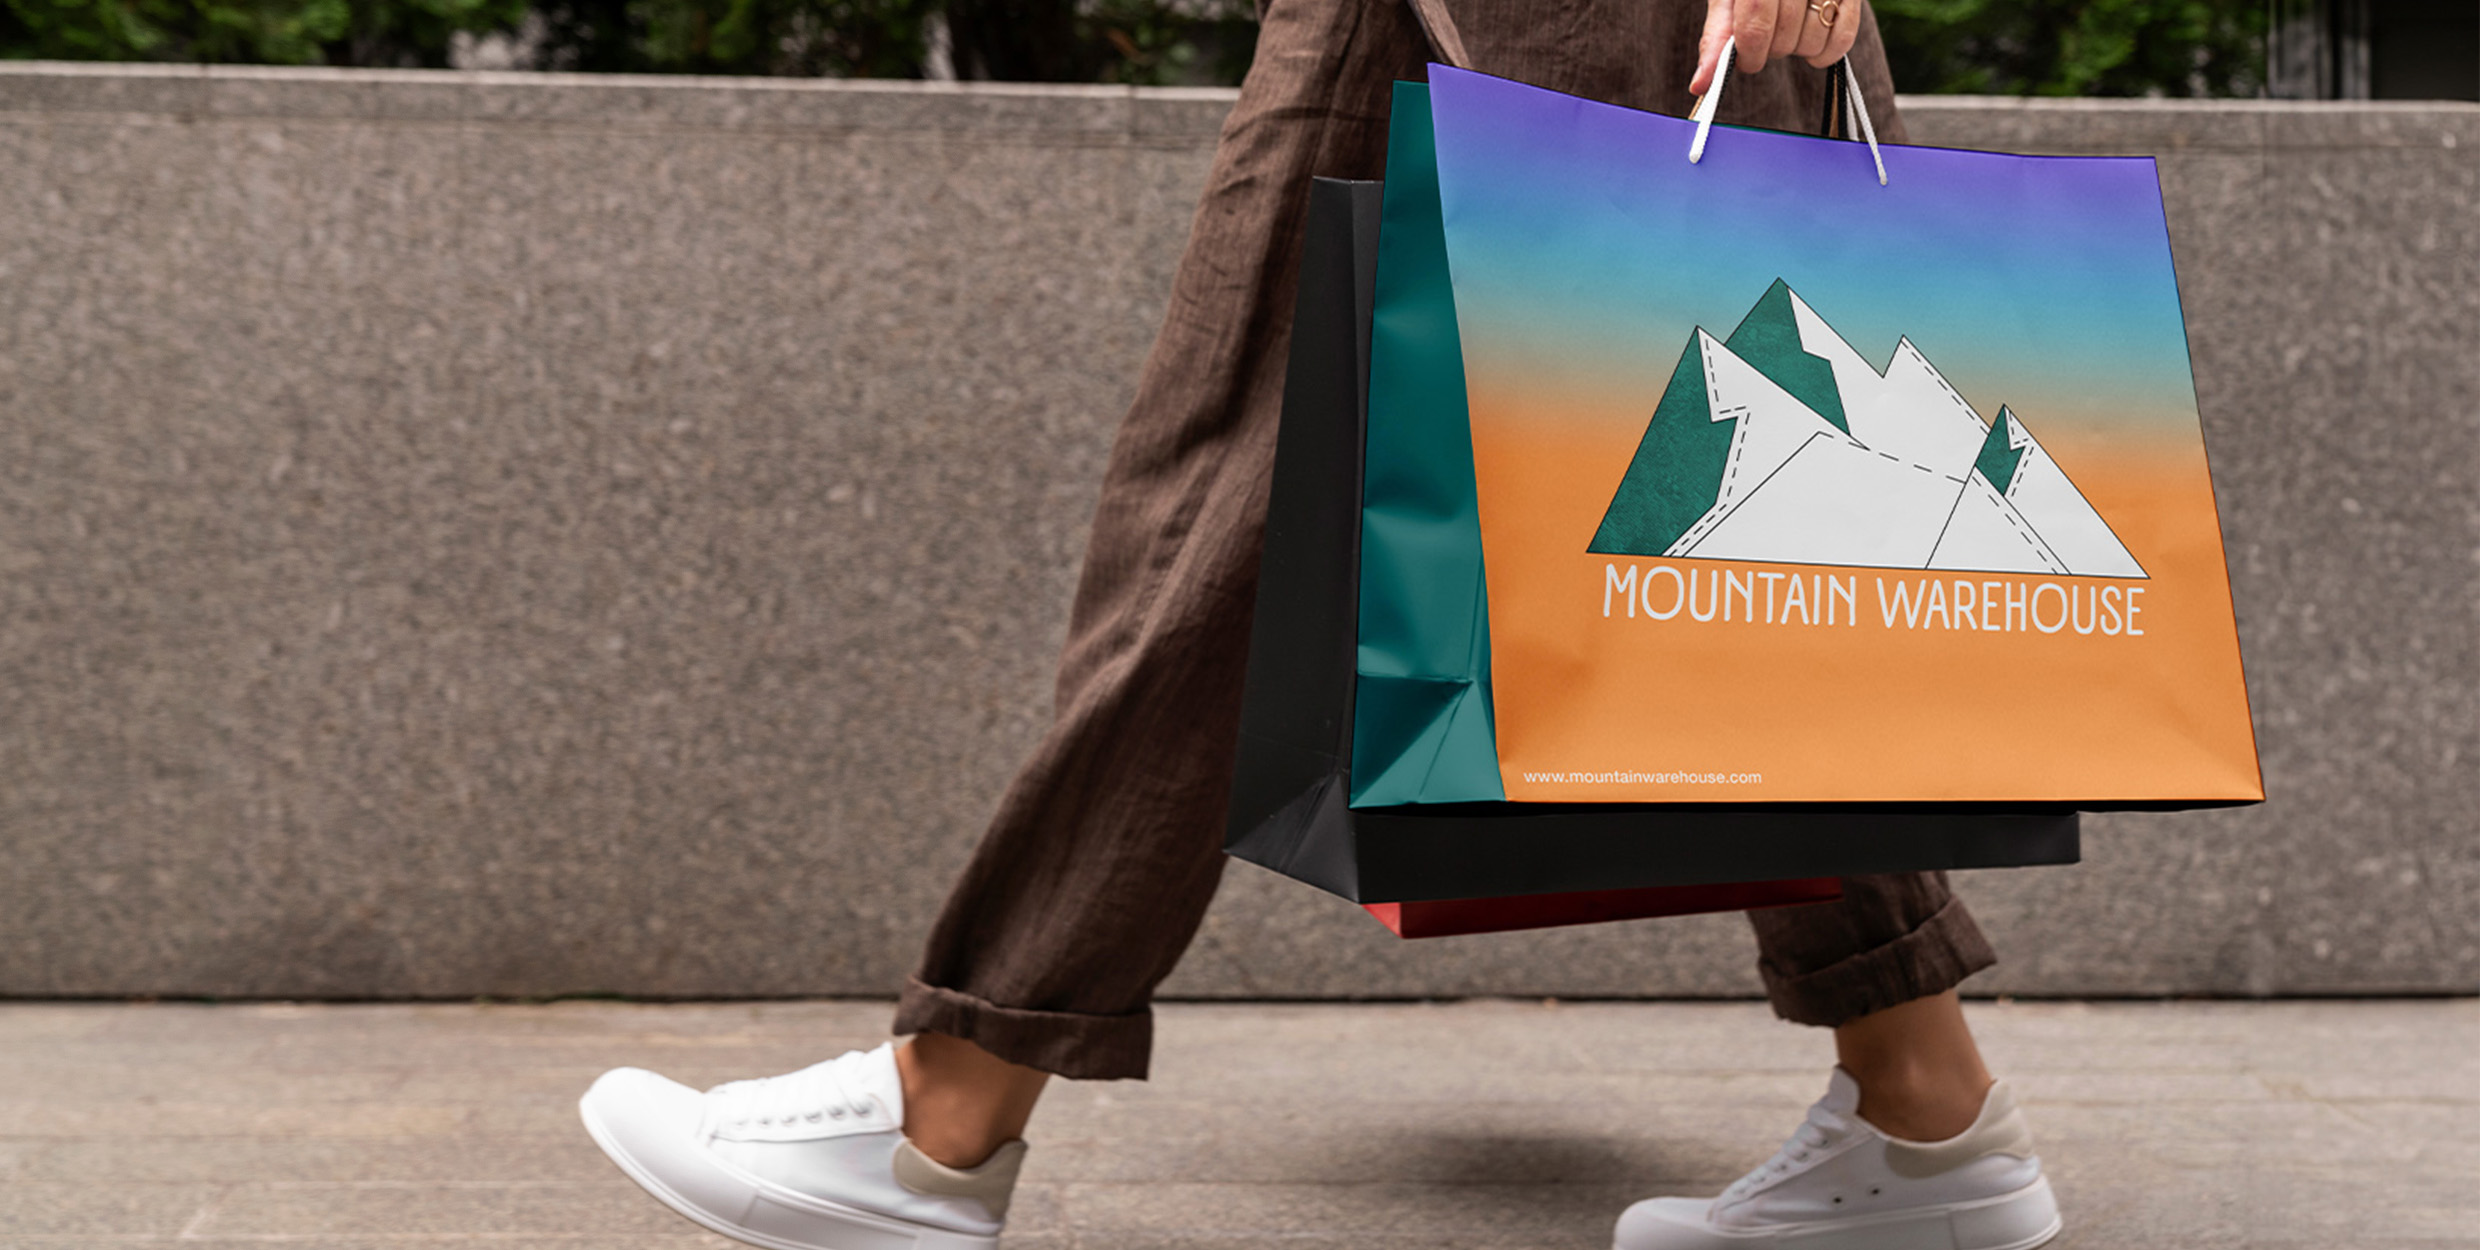 A third year project creating a rebrand for Mountain Warehouse. Using themes from clothing, hiking and natural environments to create a new and fresh brand world.